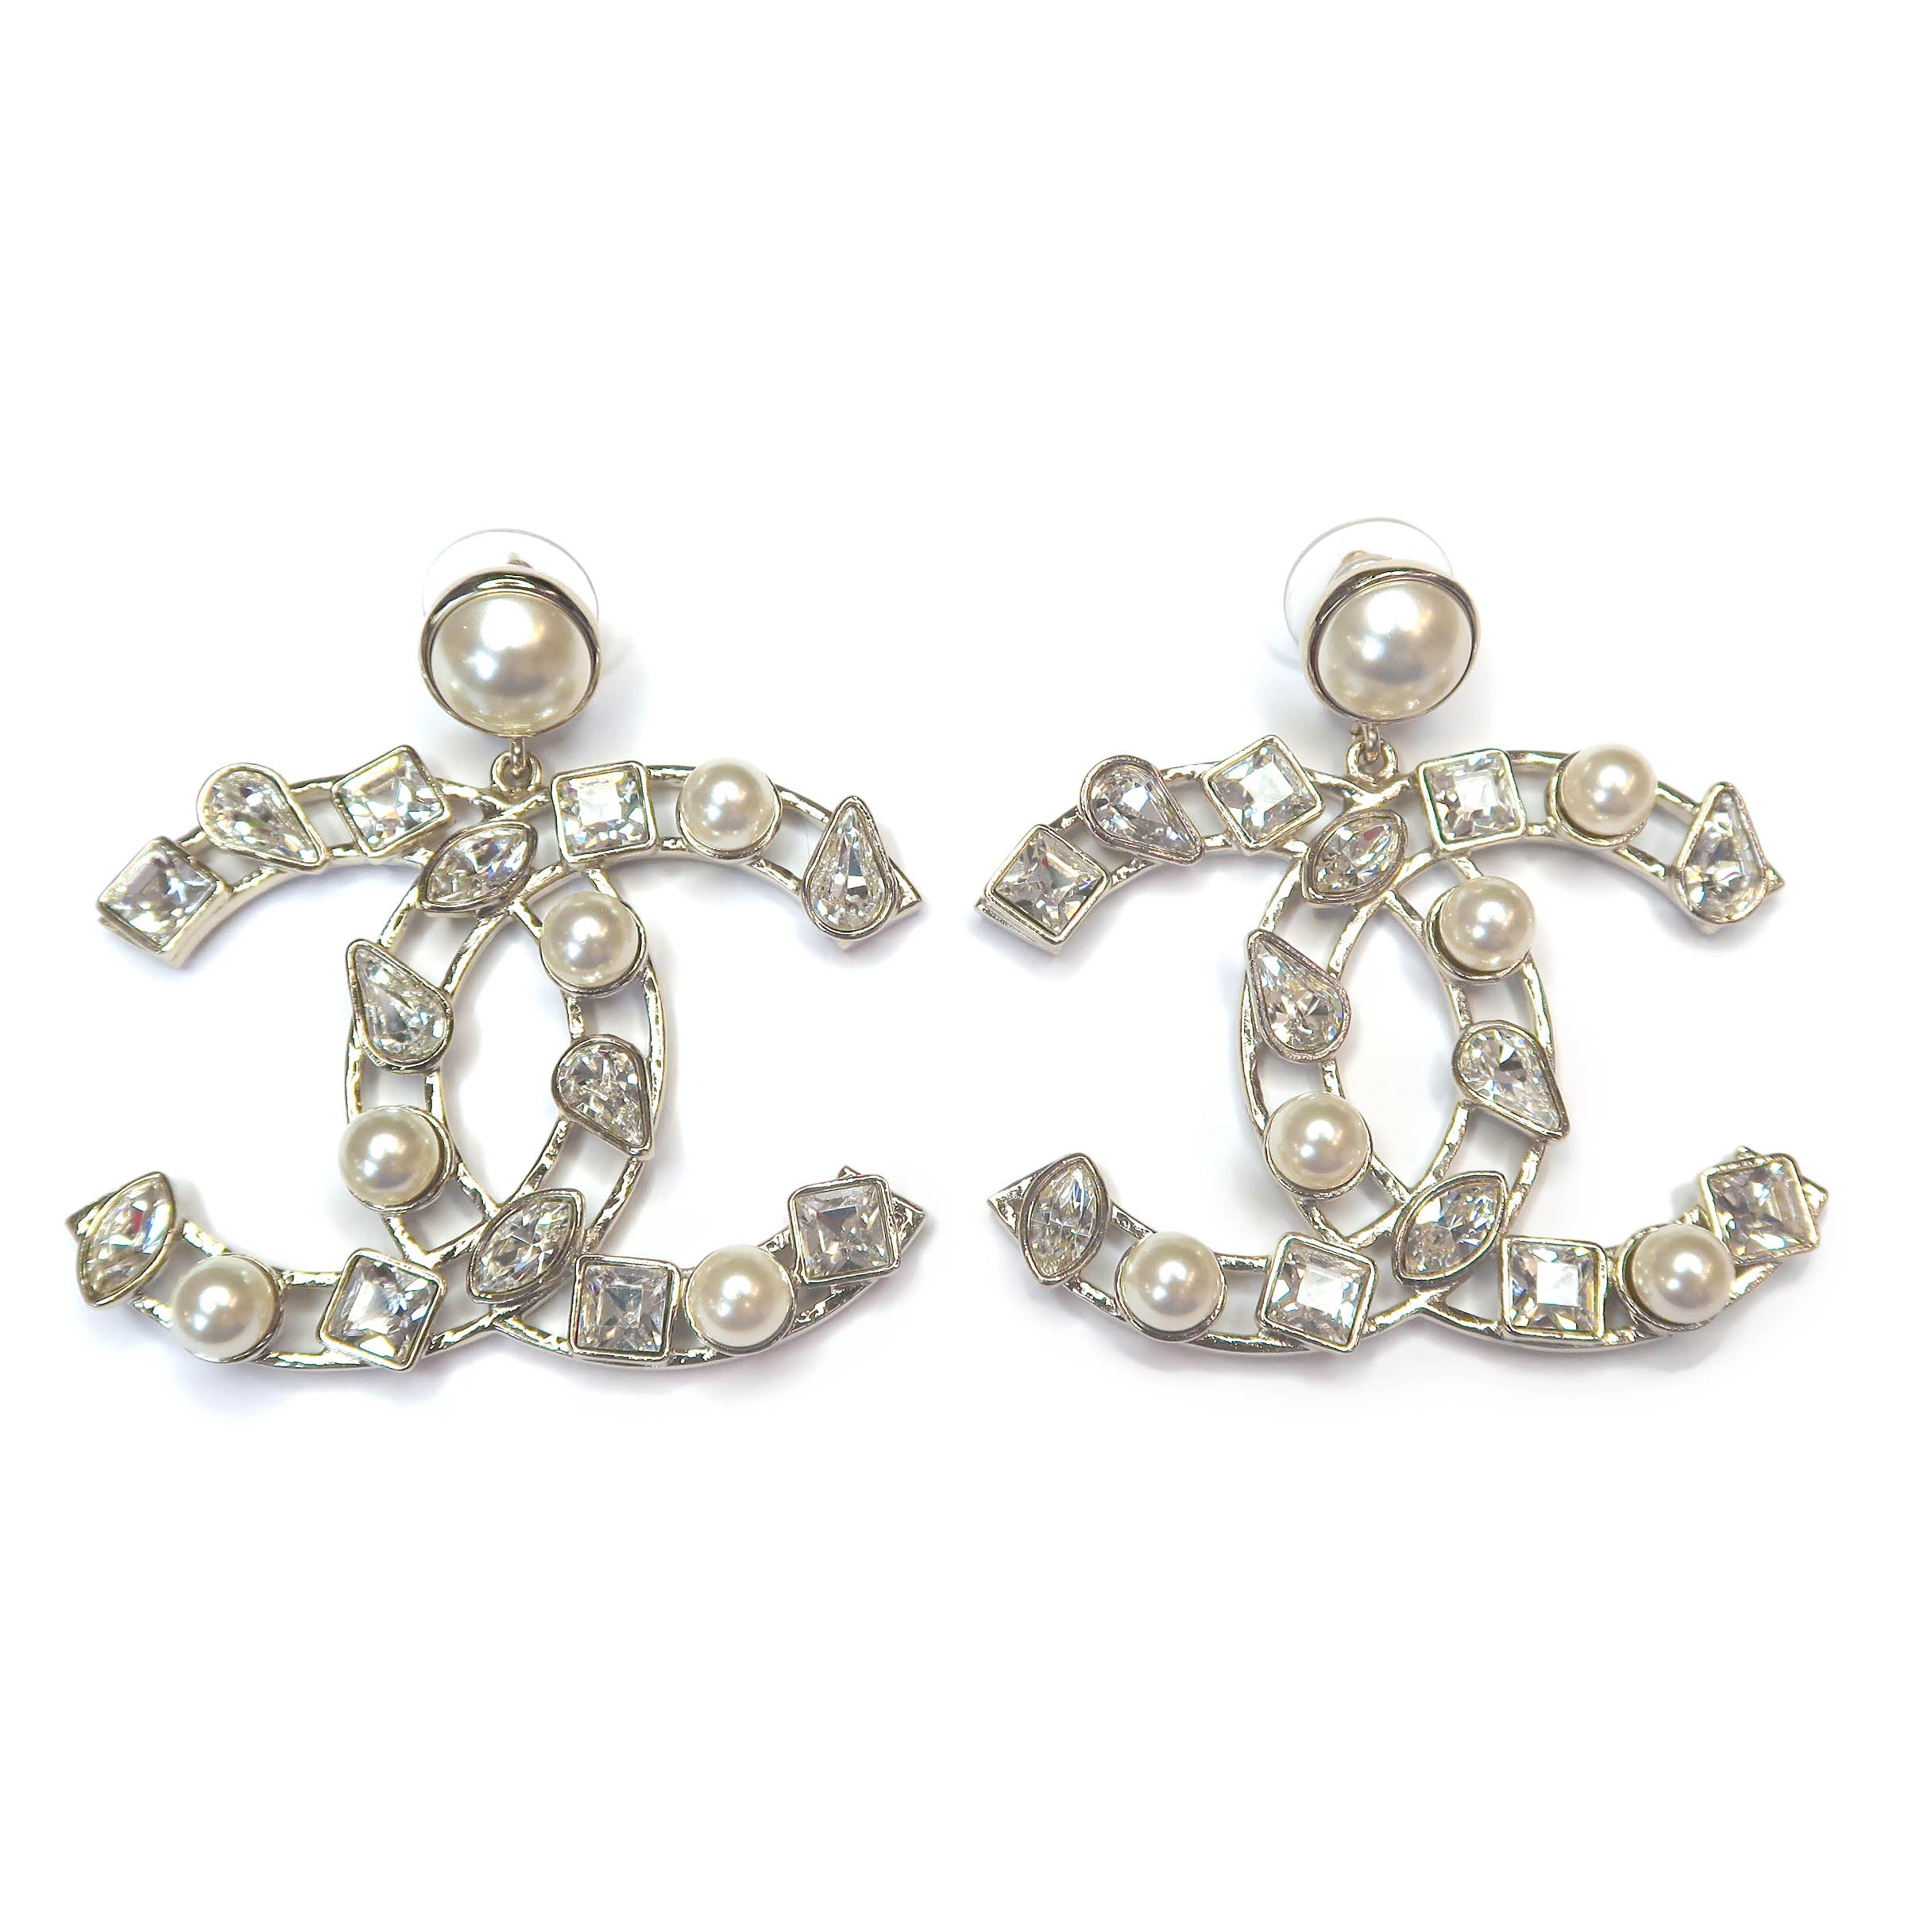 Chanel Pearl Crystal CC Drop Earrings Gold & Silver Tone 20P – Coco  Approved Studio